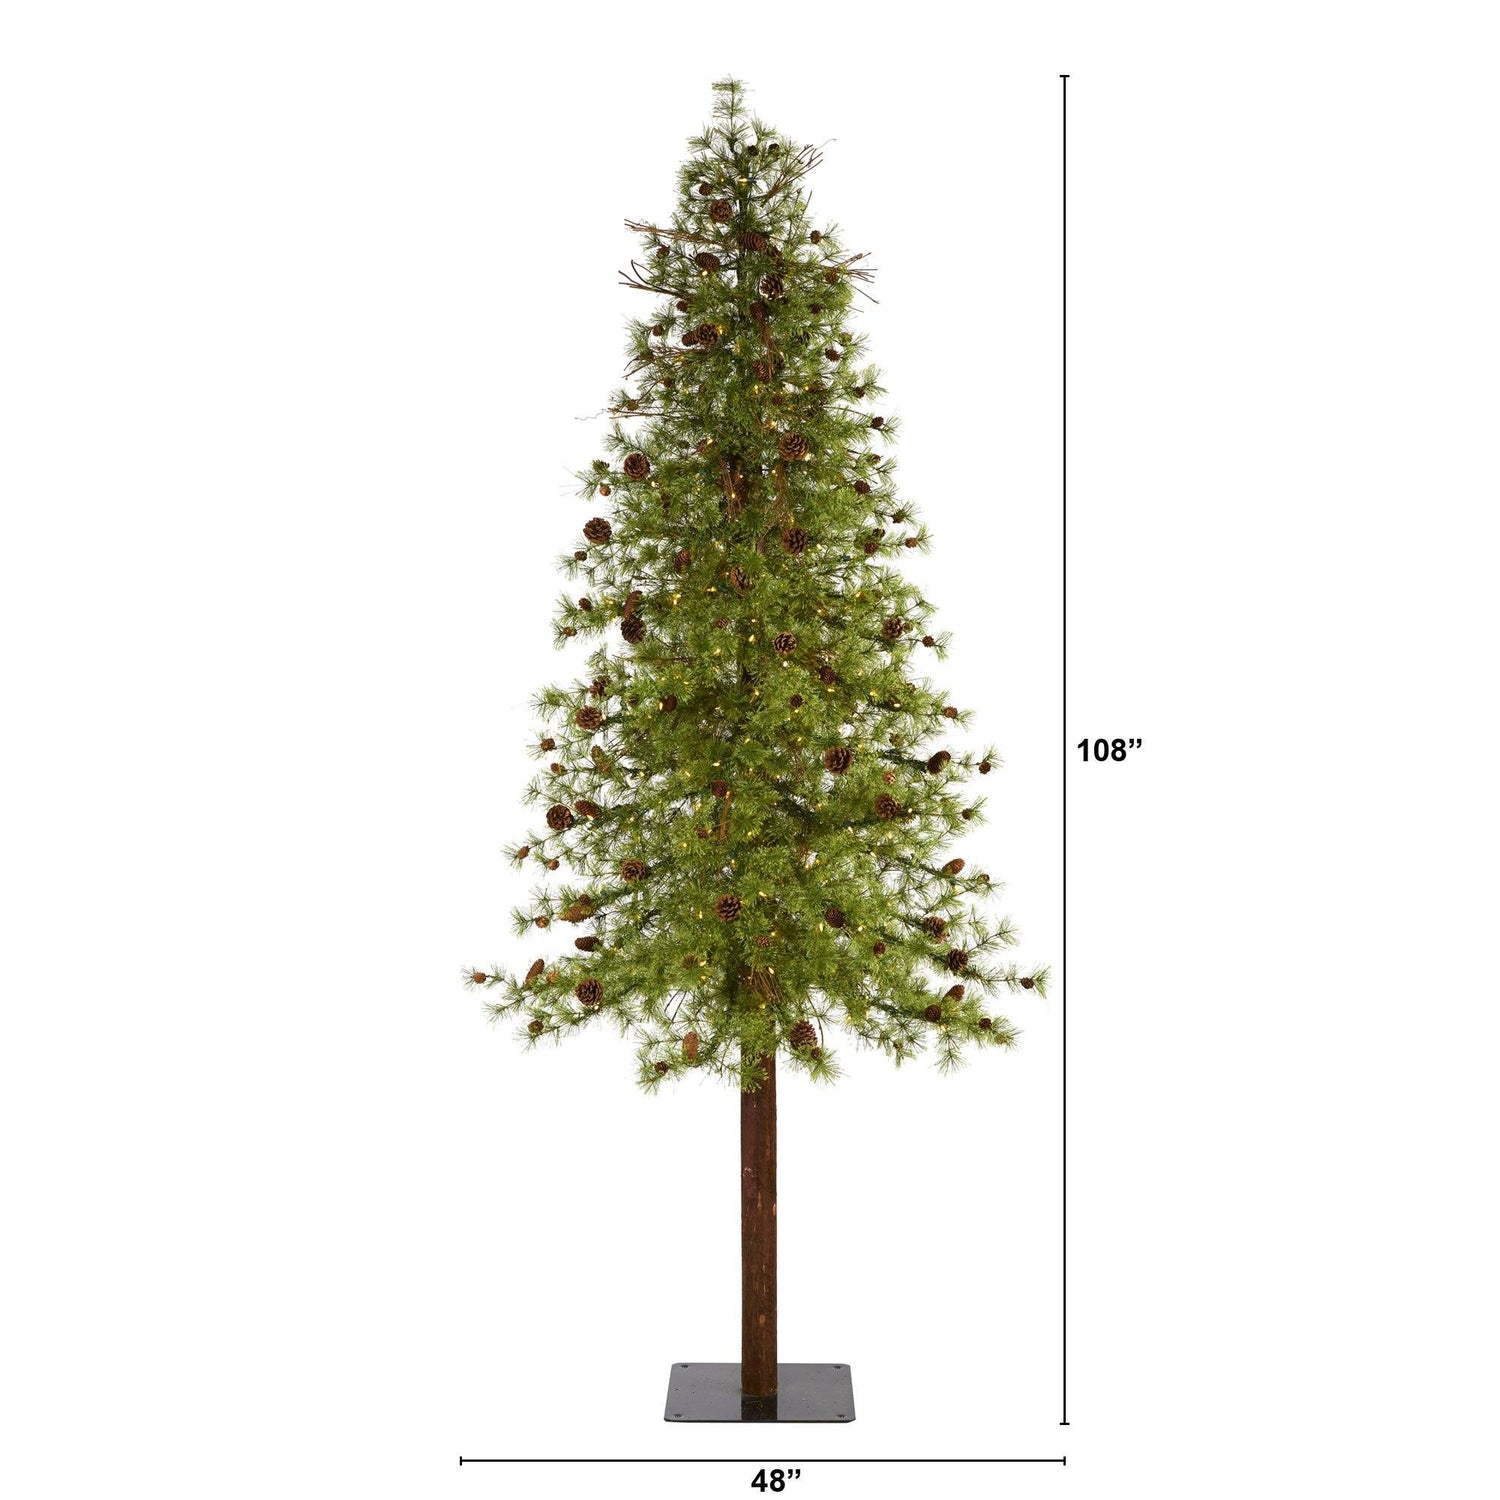 9' Wyoming Alpine Artificial Christmas Tree with 300 Clear (multifunction) LED Lights and Pine Cones on Natural Trunk